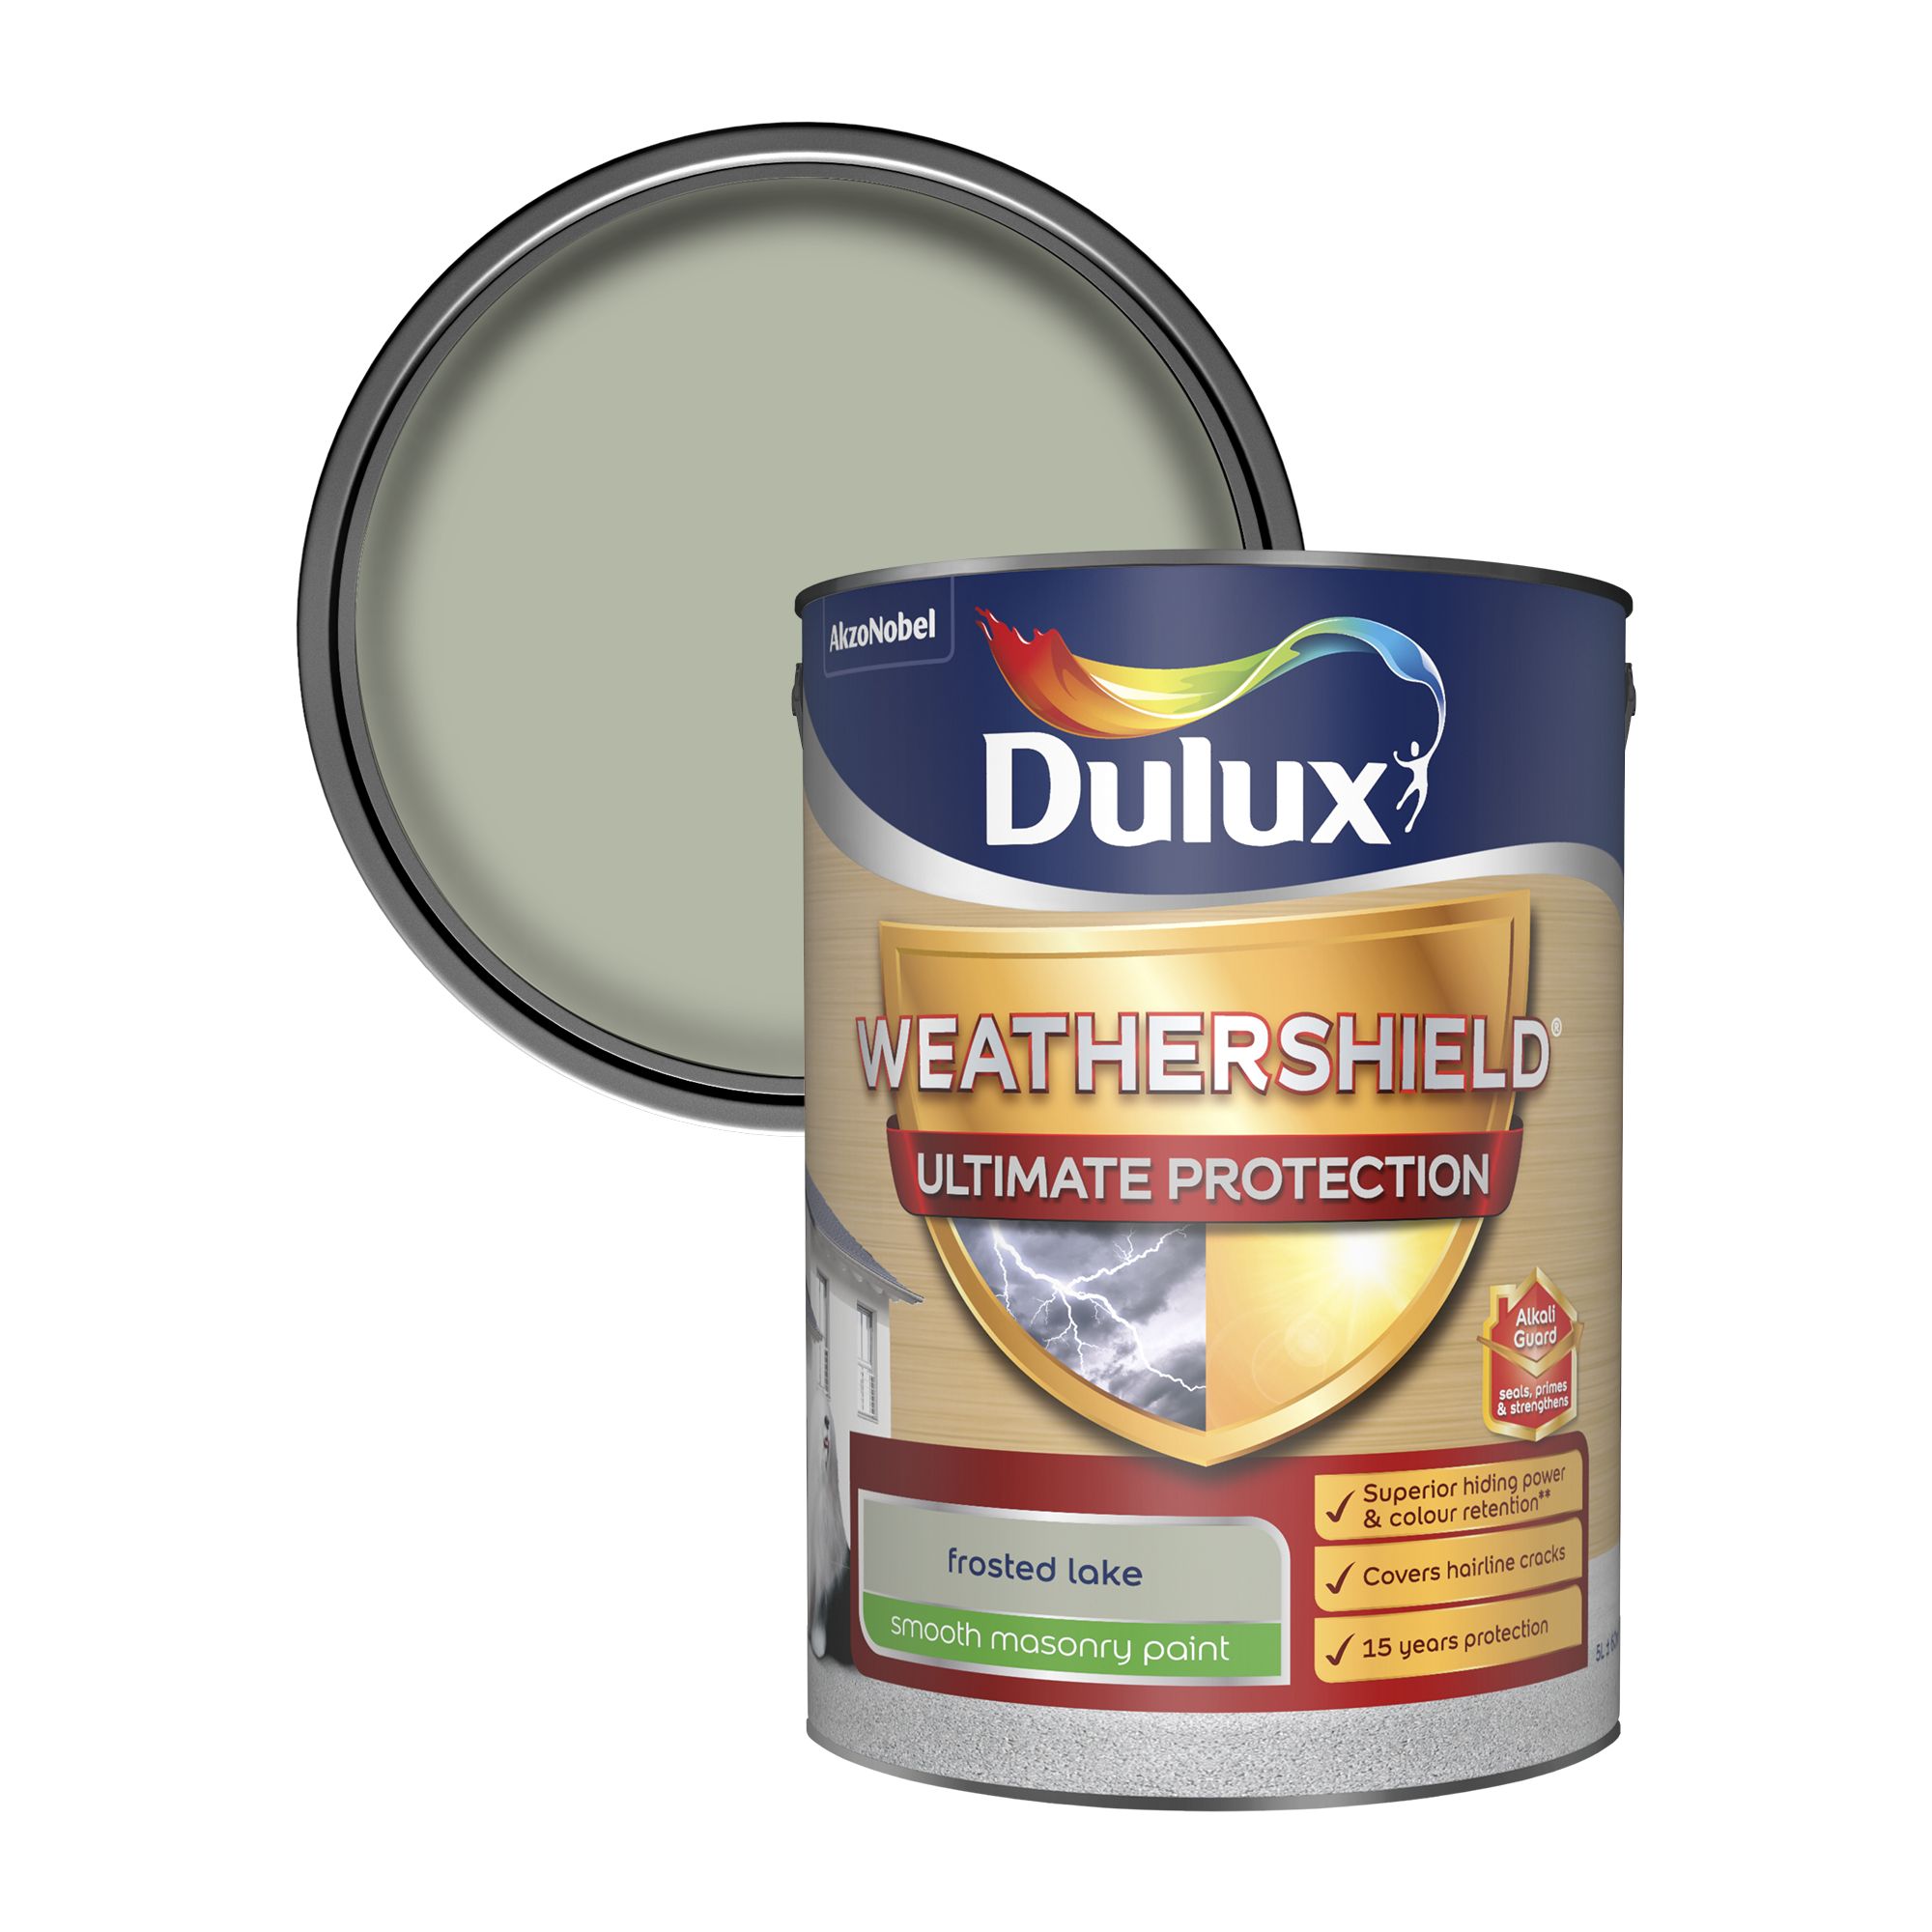  Dulux  Weathershield  ultimate protection  Frosted lake 